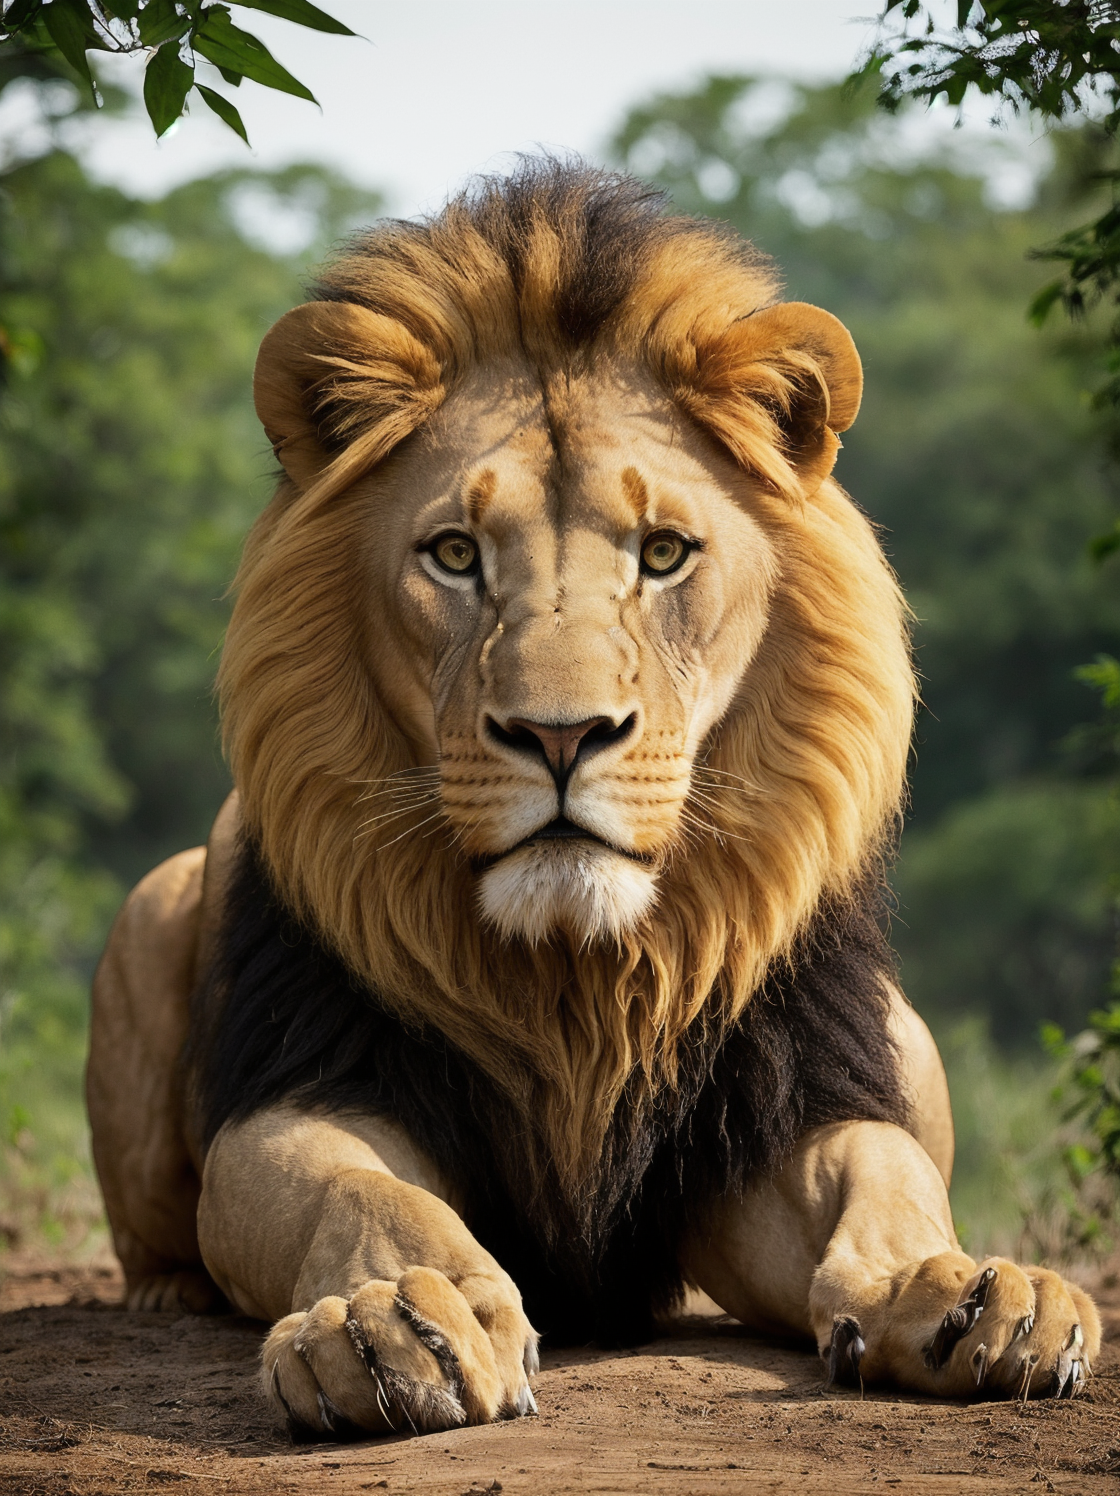 Lion soon realized that his powerful roar was an asset that could protect the jungle from outside dangers.With the support...